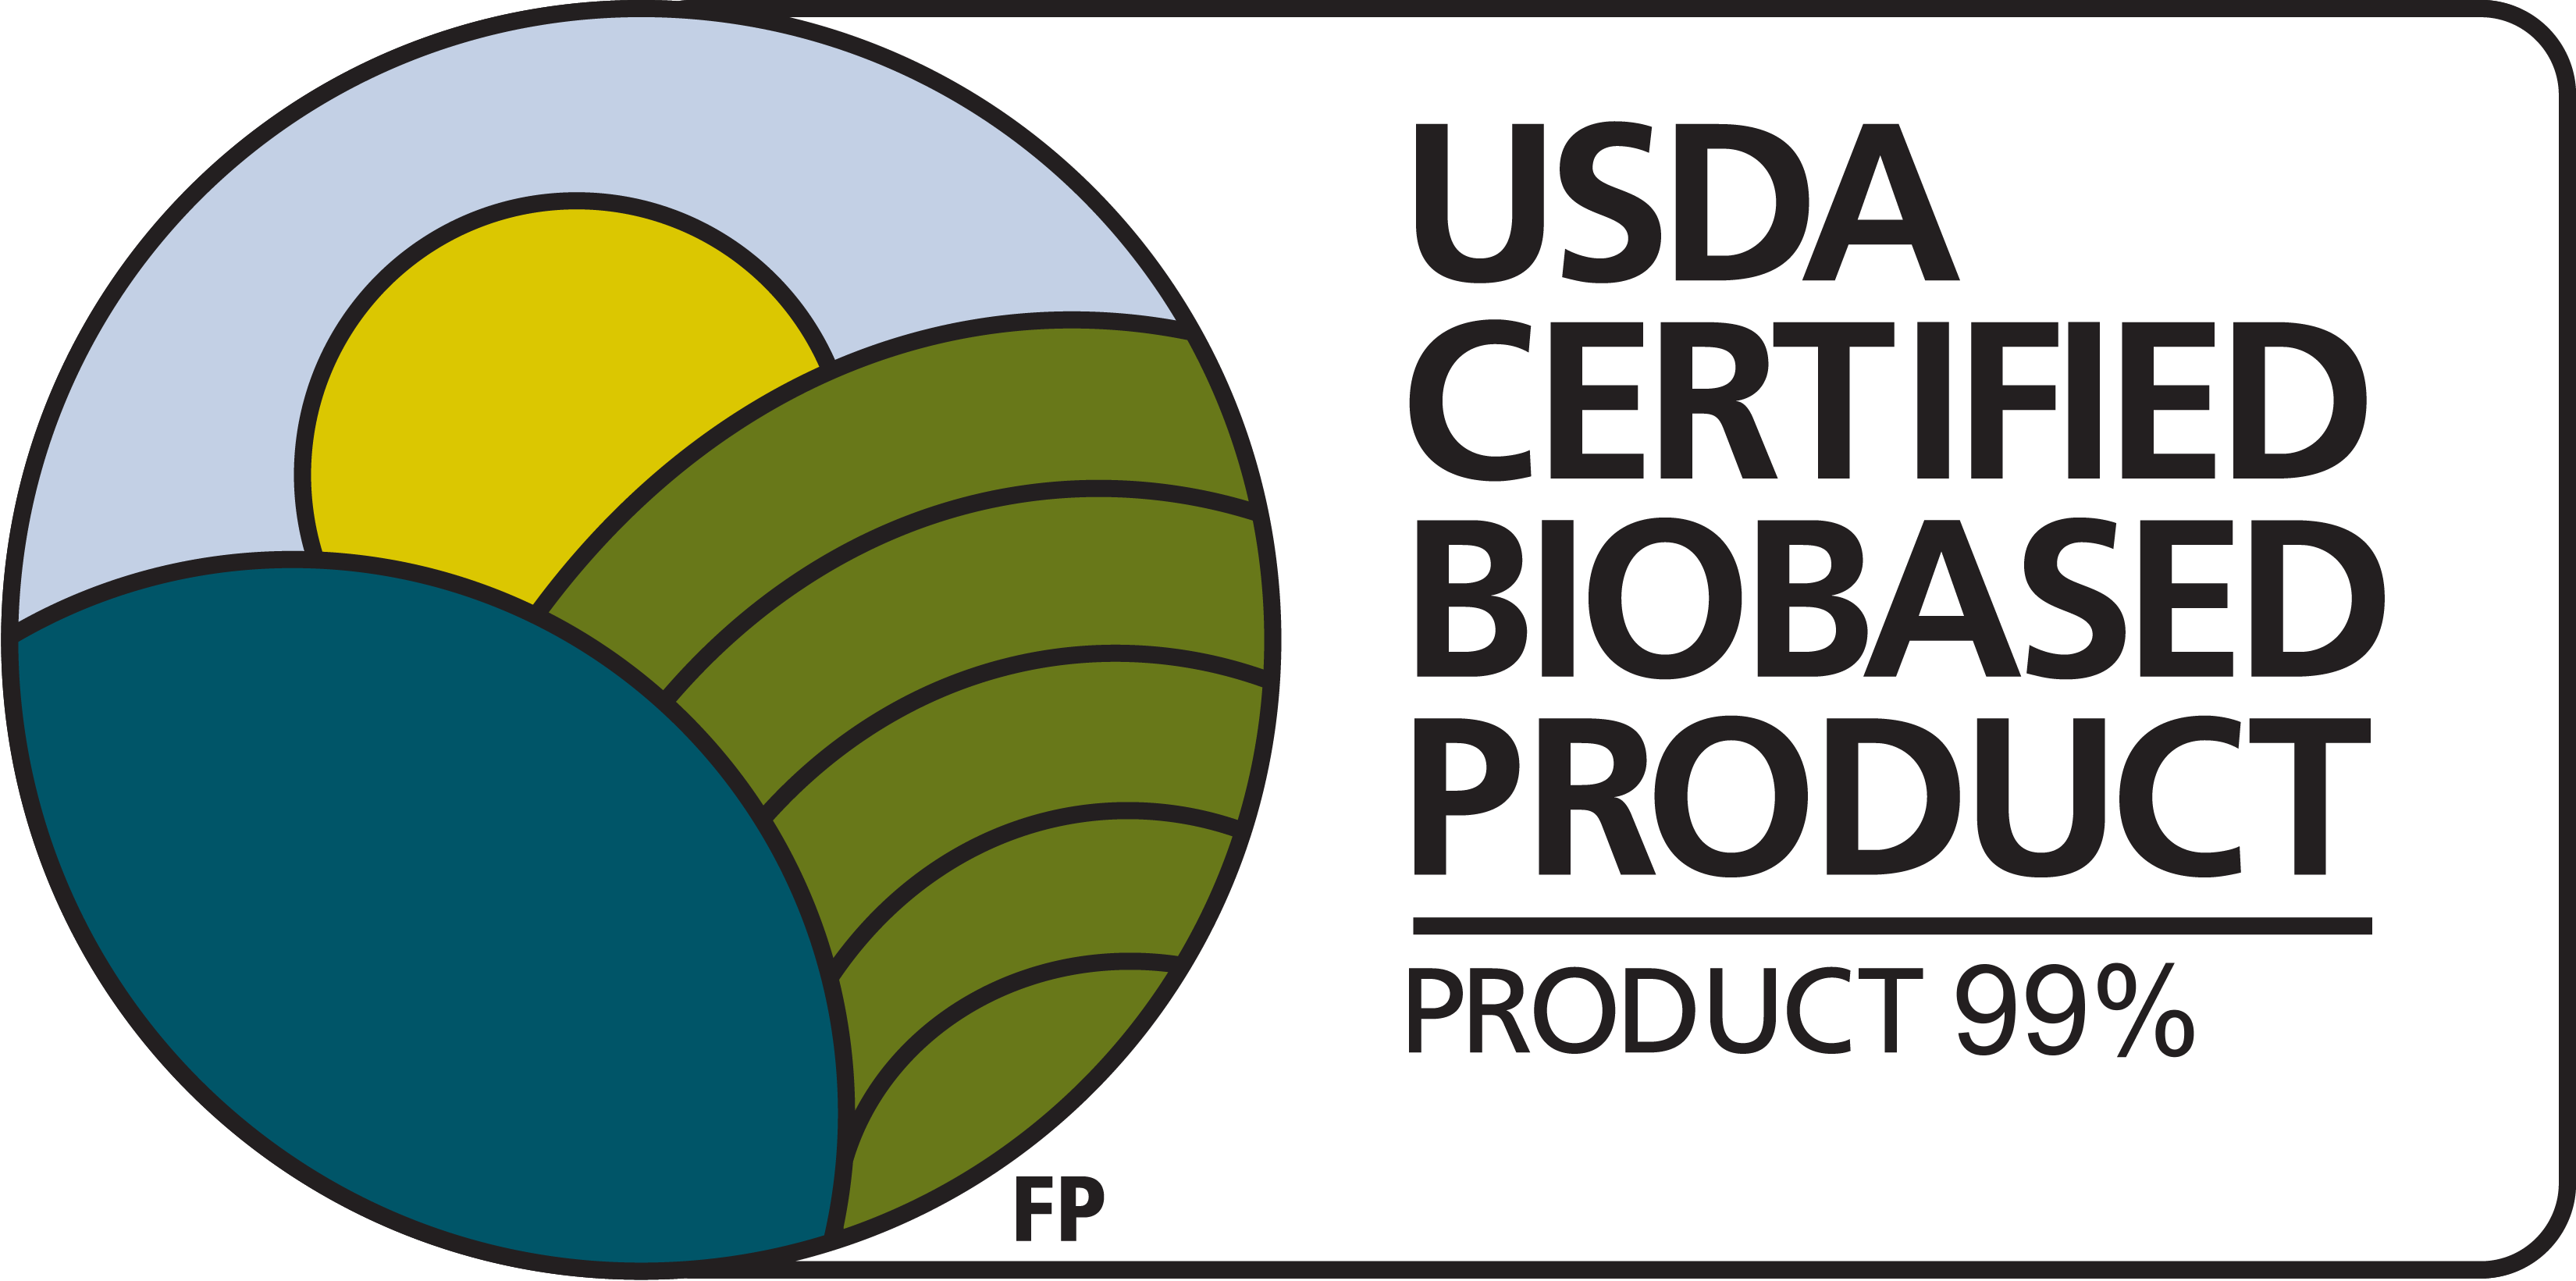 USDA Certified Biobased Product logo label for OrganoTex waterproofing